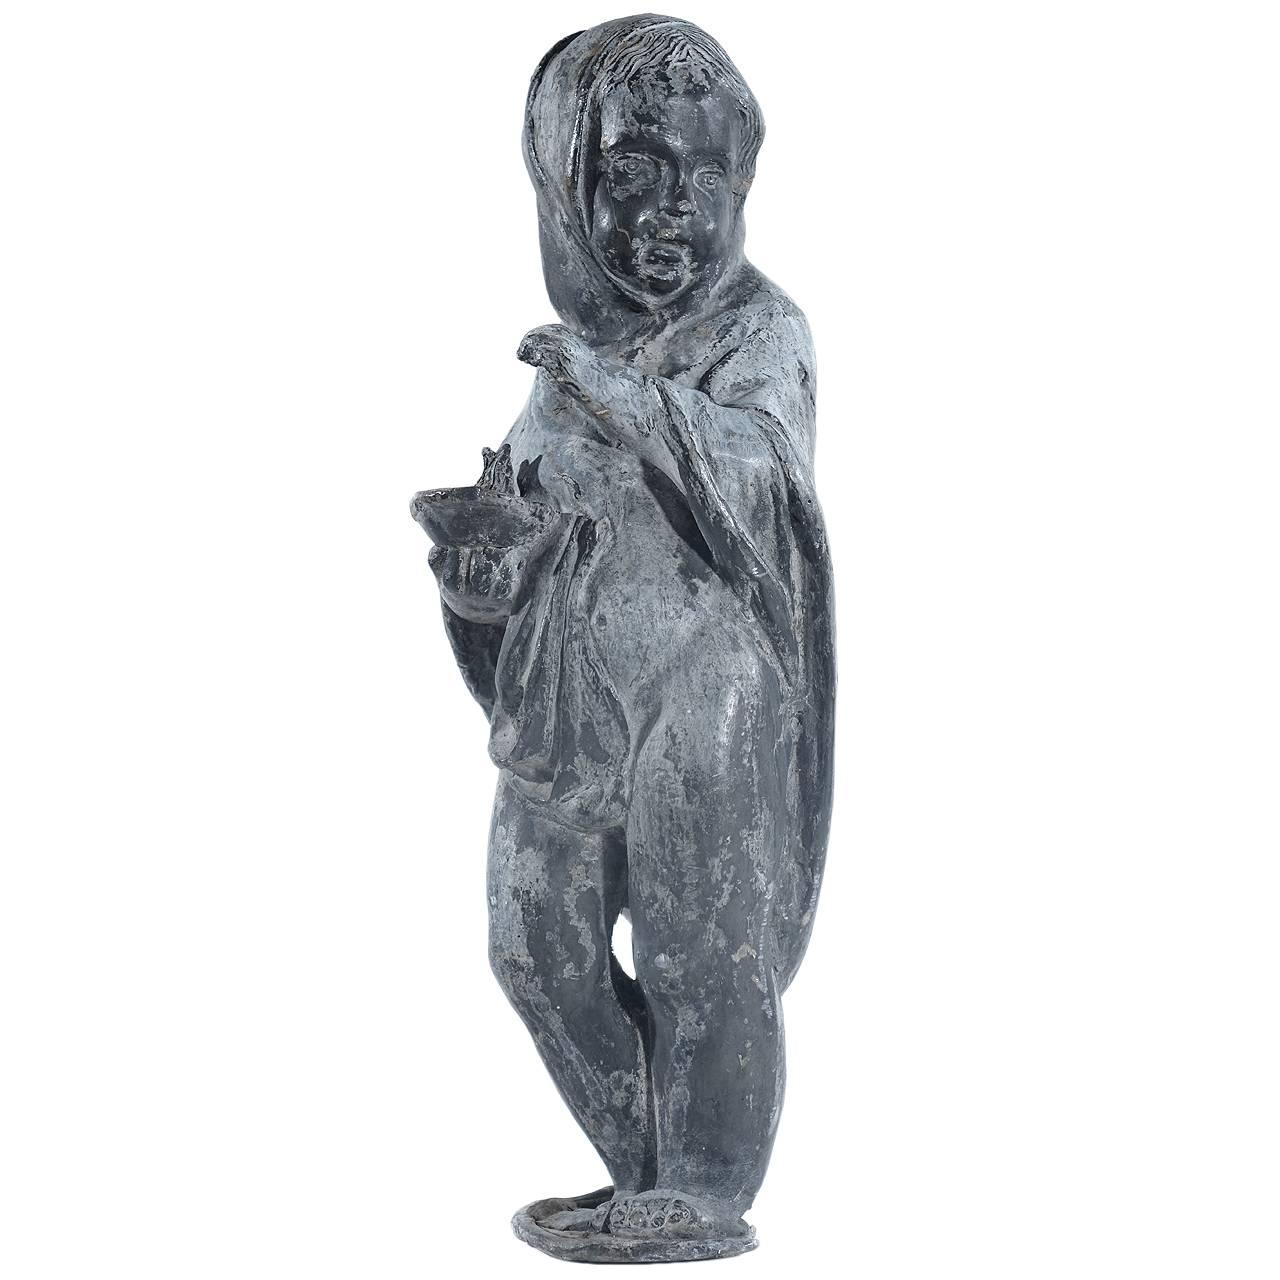 This is a 20 inch statue of a child holding a flame. The sculpture mislead and surprisingly heavy for its size. The patina is beautiful.